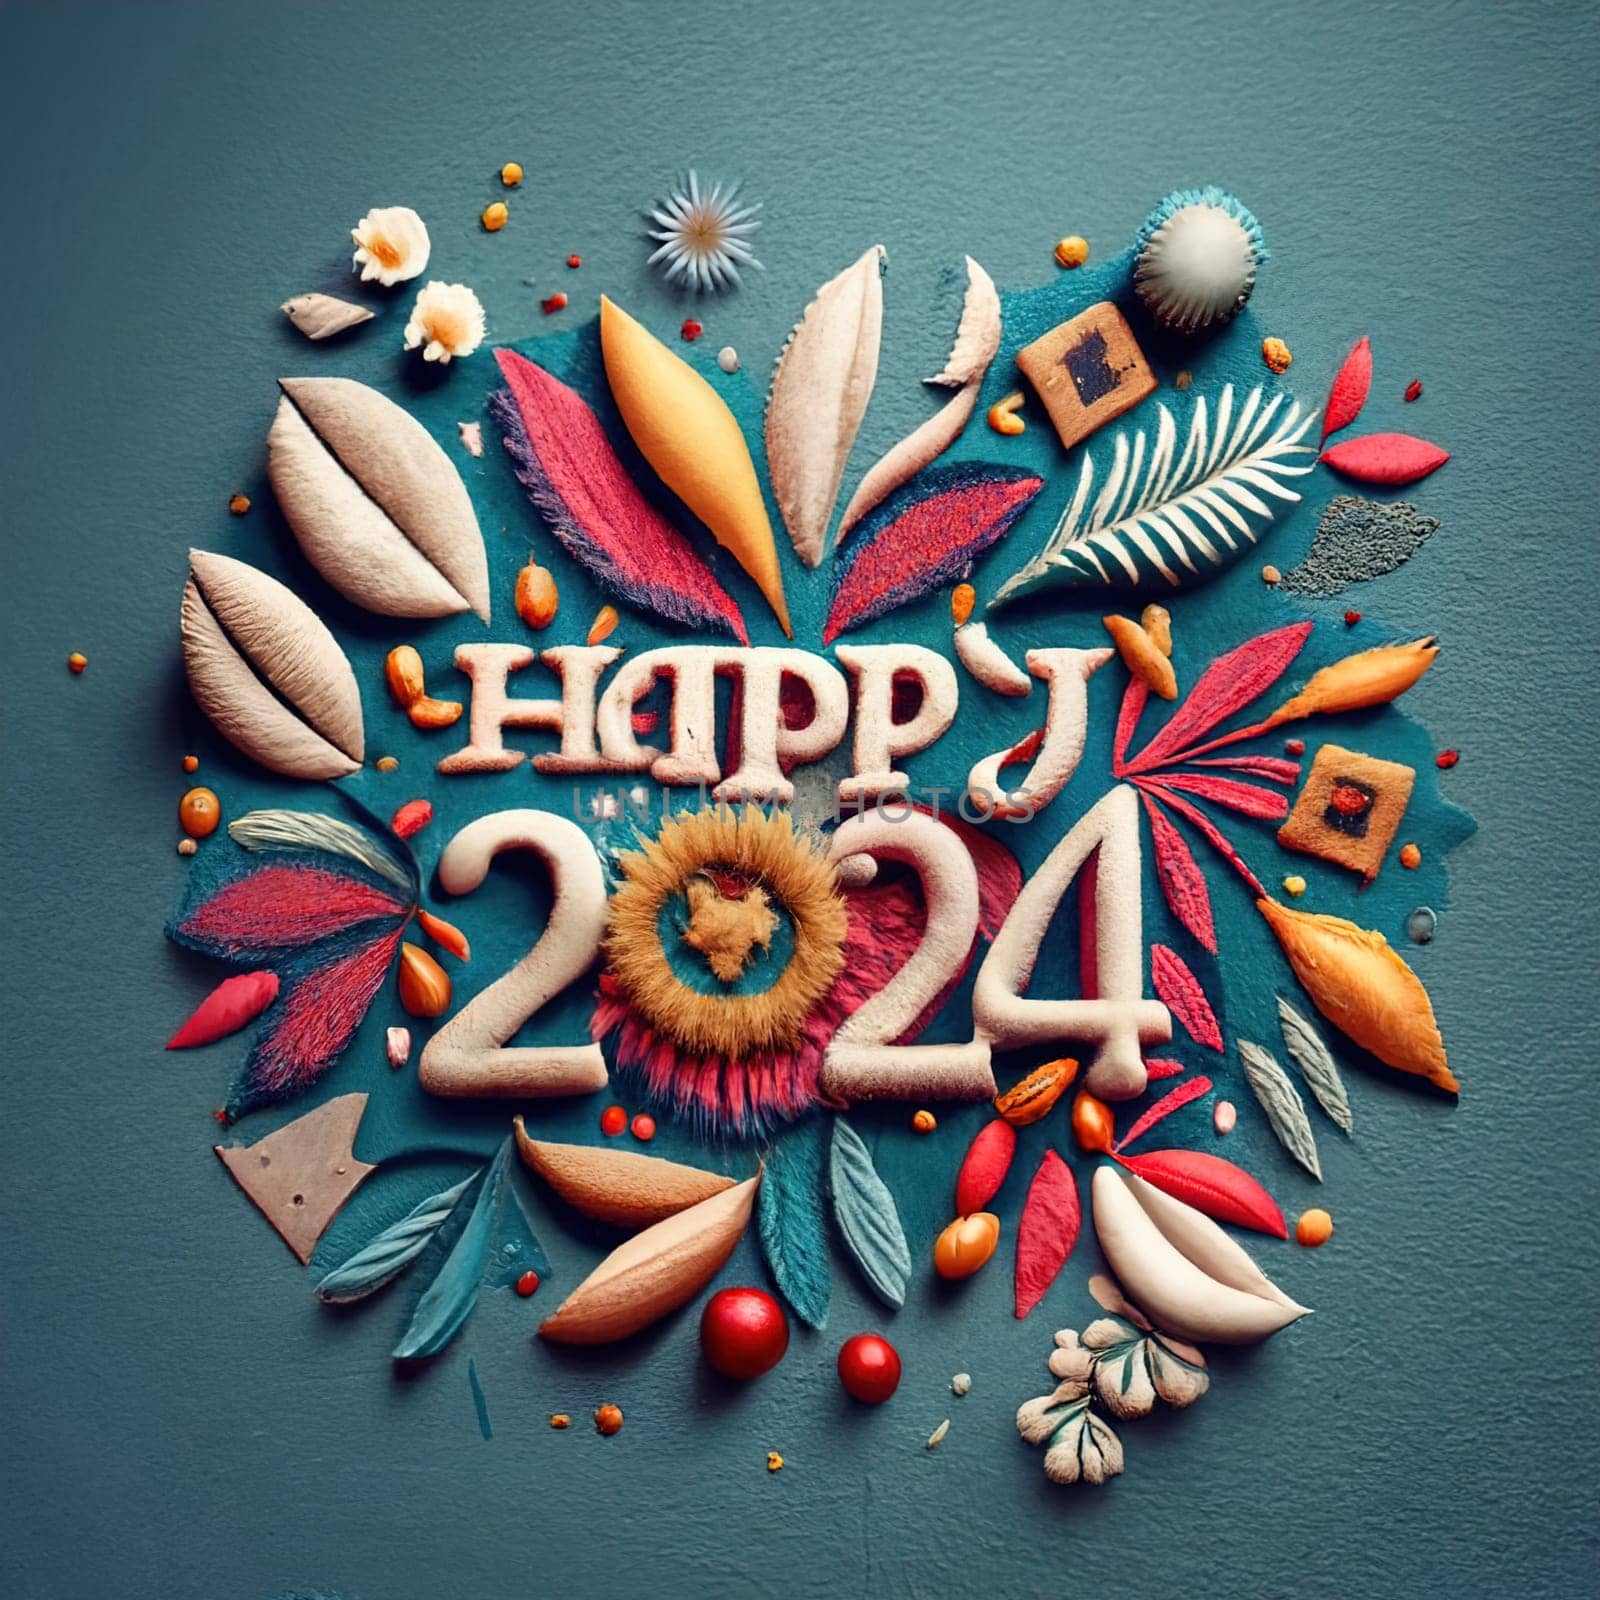 Text '2024 Happy New Year' Embroidered on Textured Fabric - Festive Embroidery Design for New Year Celebration download image